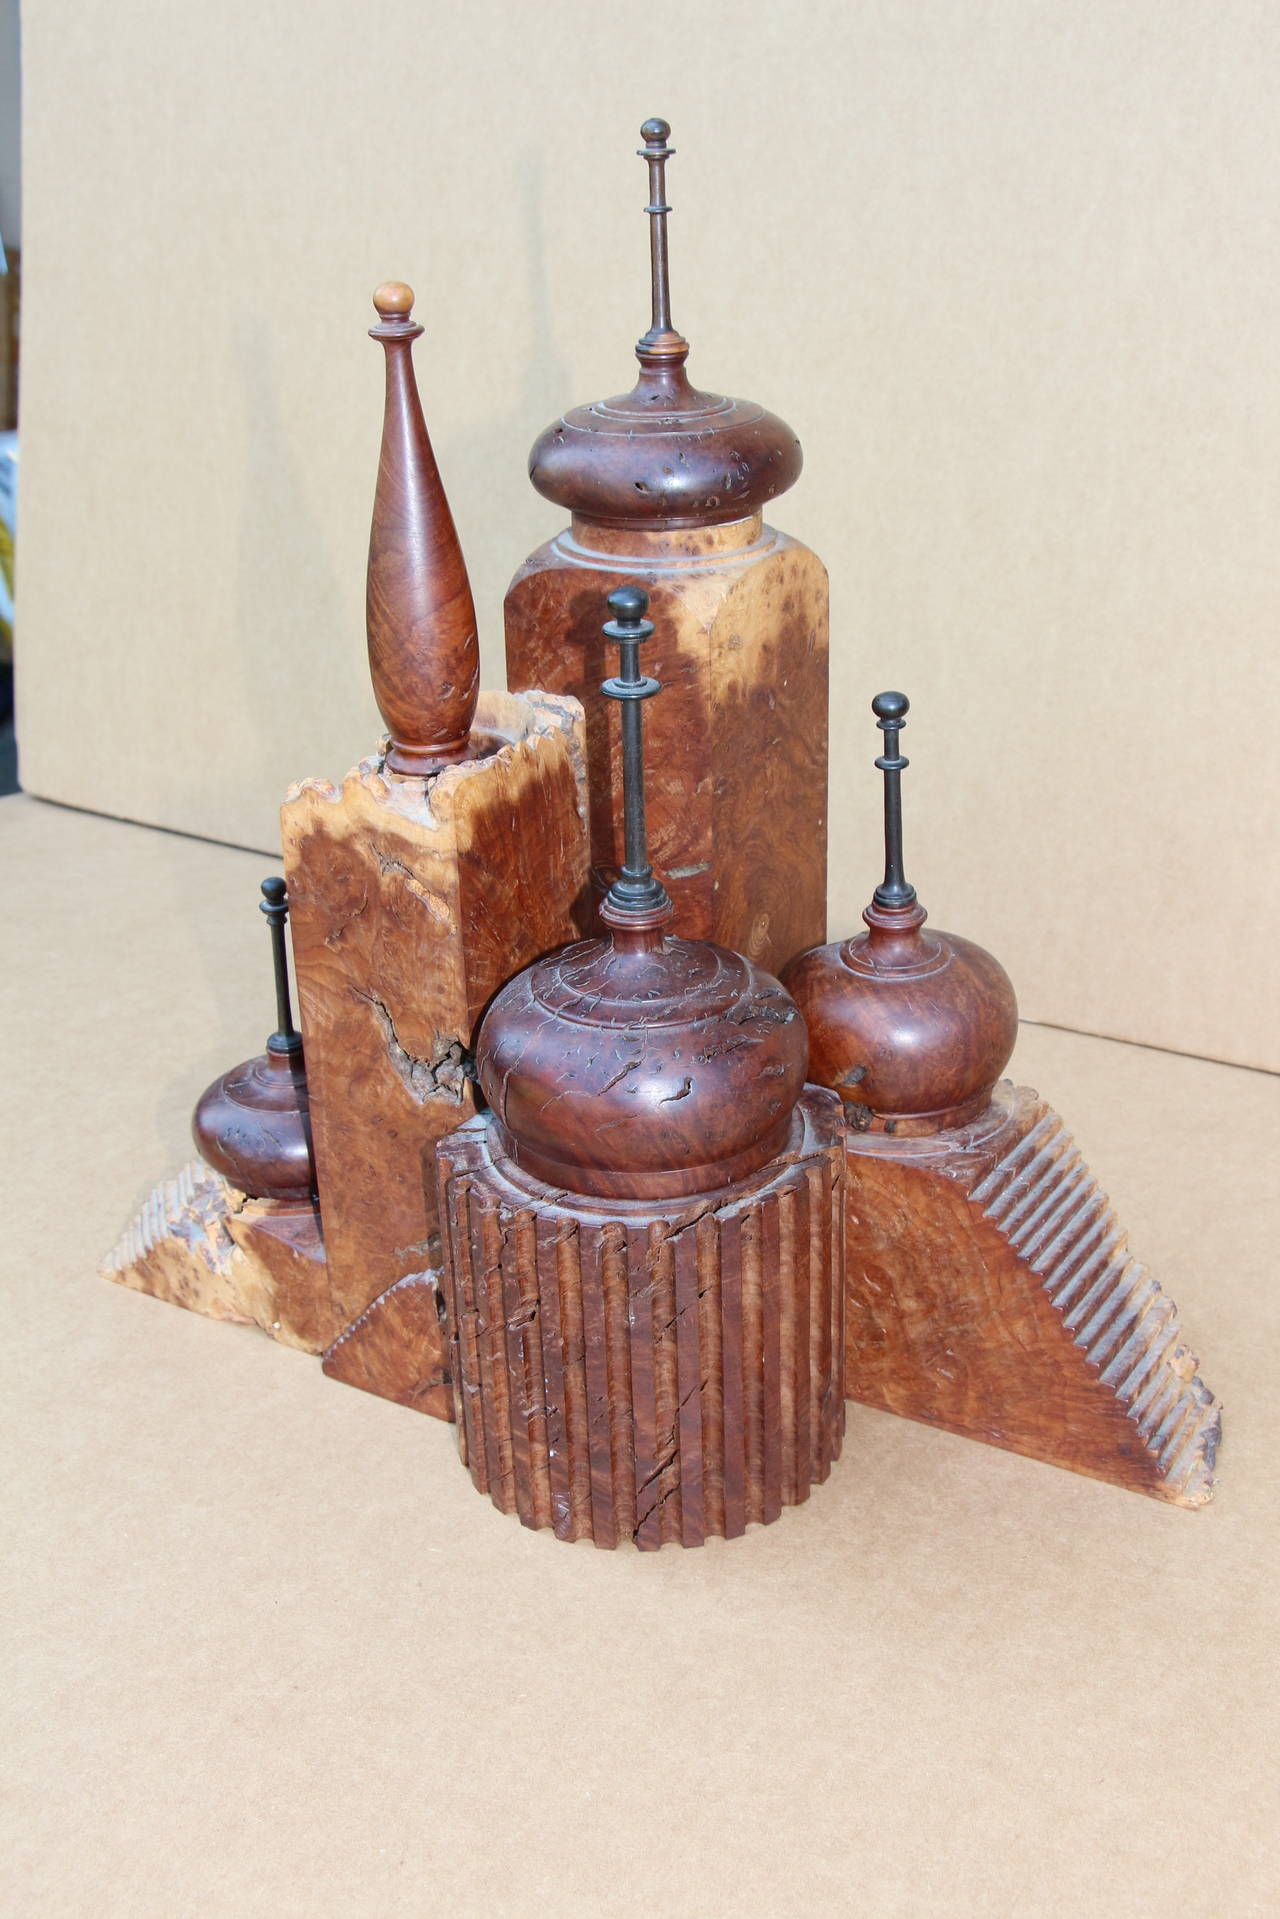 A most unusual burl wood hand-turned desk top item built to look like a castle with stairs and turrets. There is a letter opener in one made of Macassar ebony for the blade. The tops are removable and there are is some dabs of wax or some other